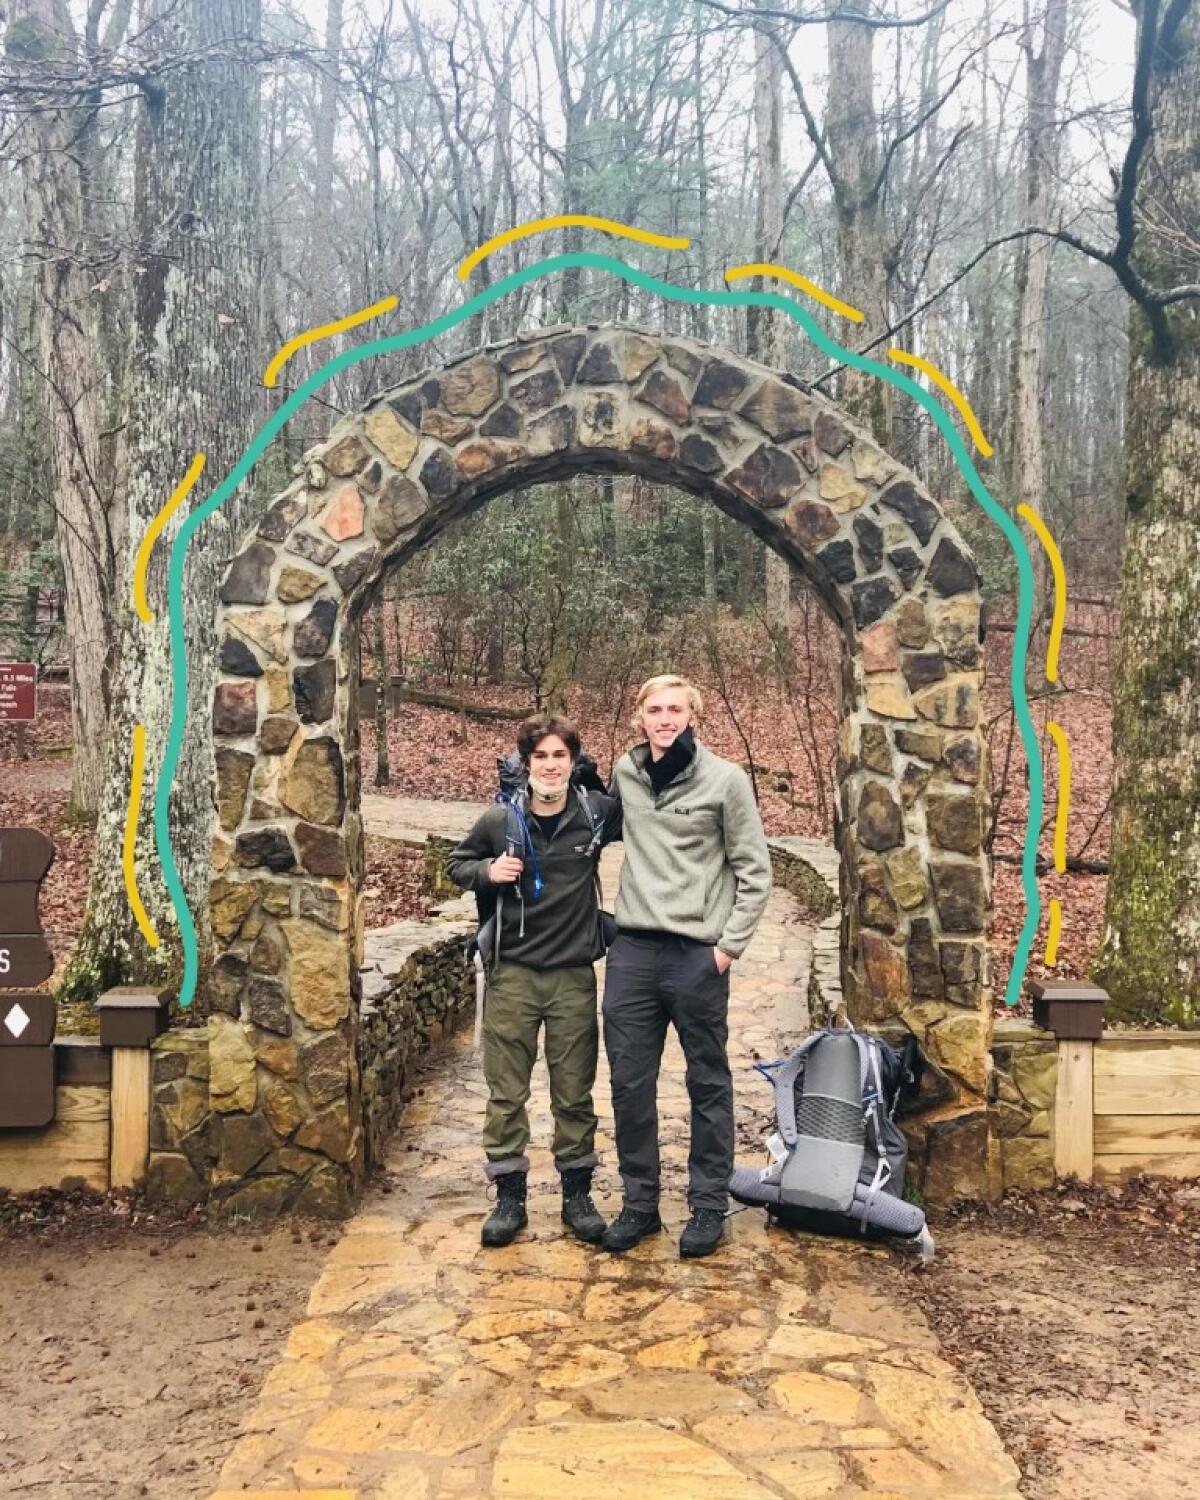 Sammy Potter, 21, and Jackson Parell, 20, began the Appalachian Trail from its starting point on Springer Mountain.